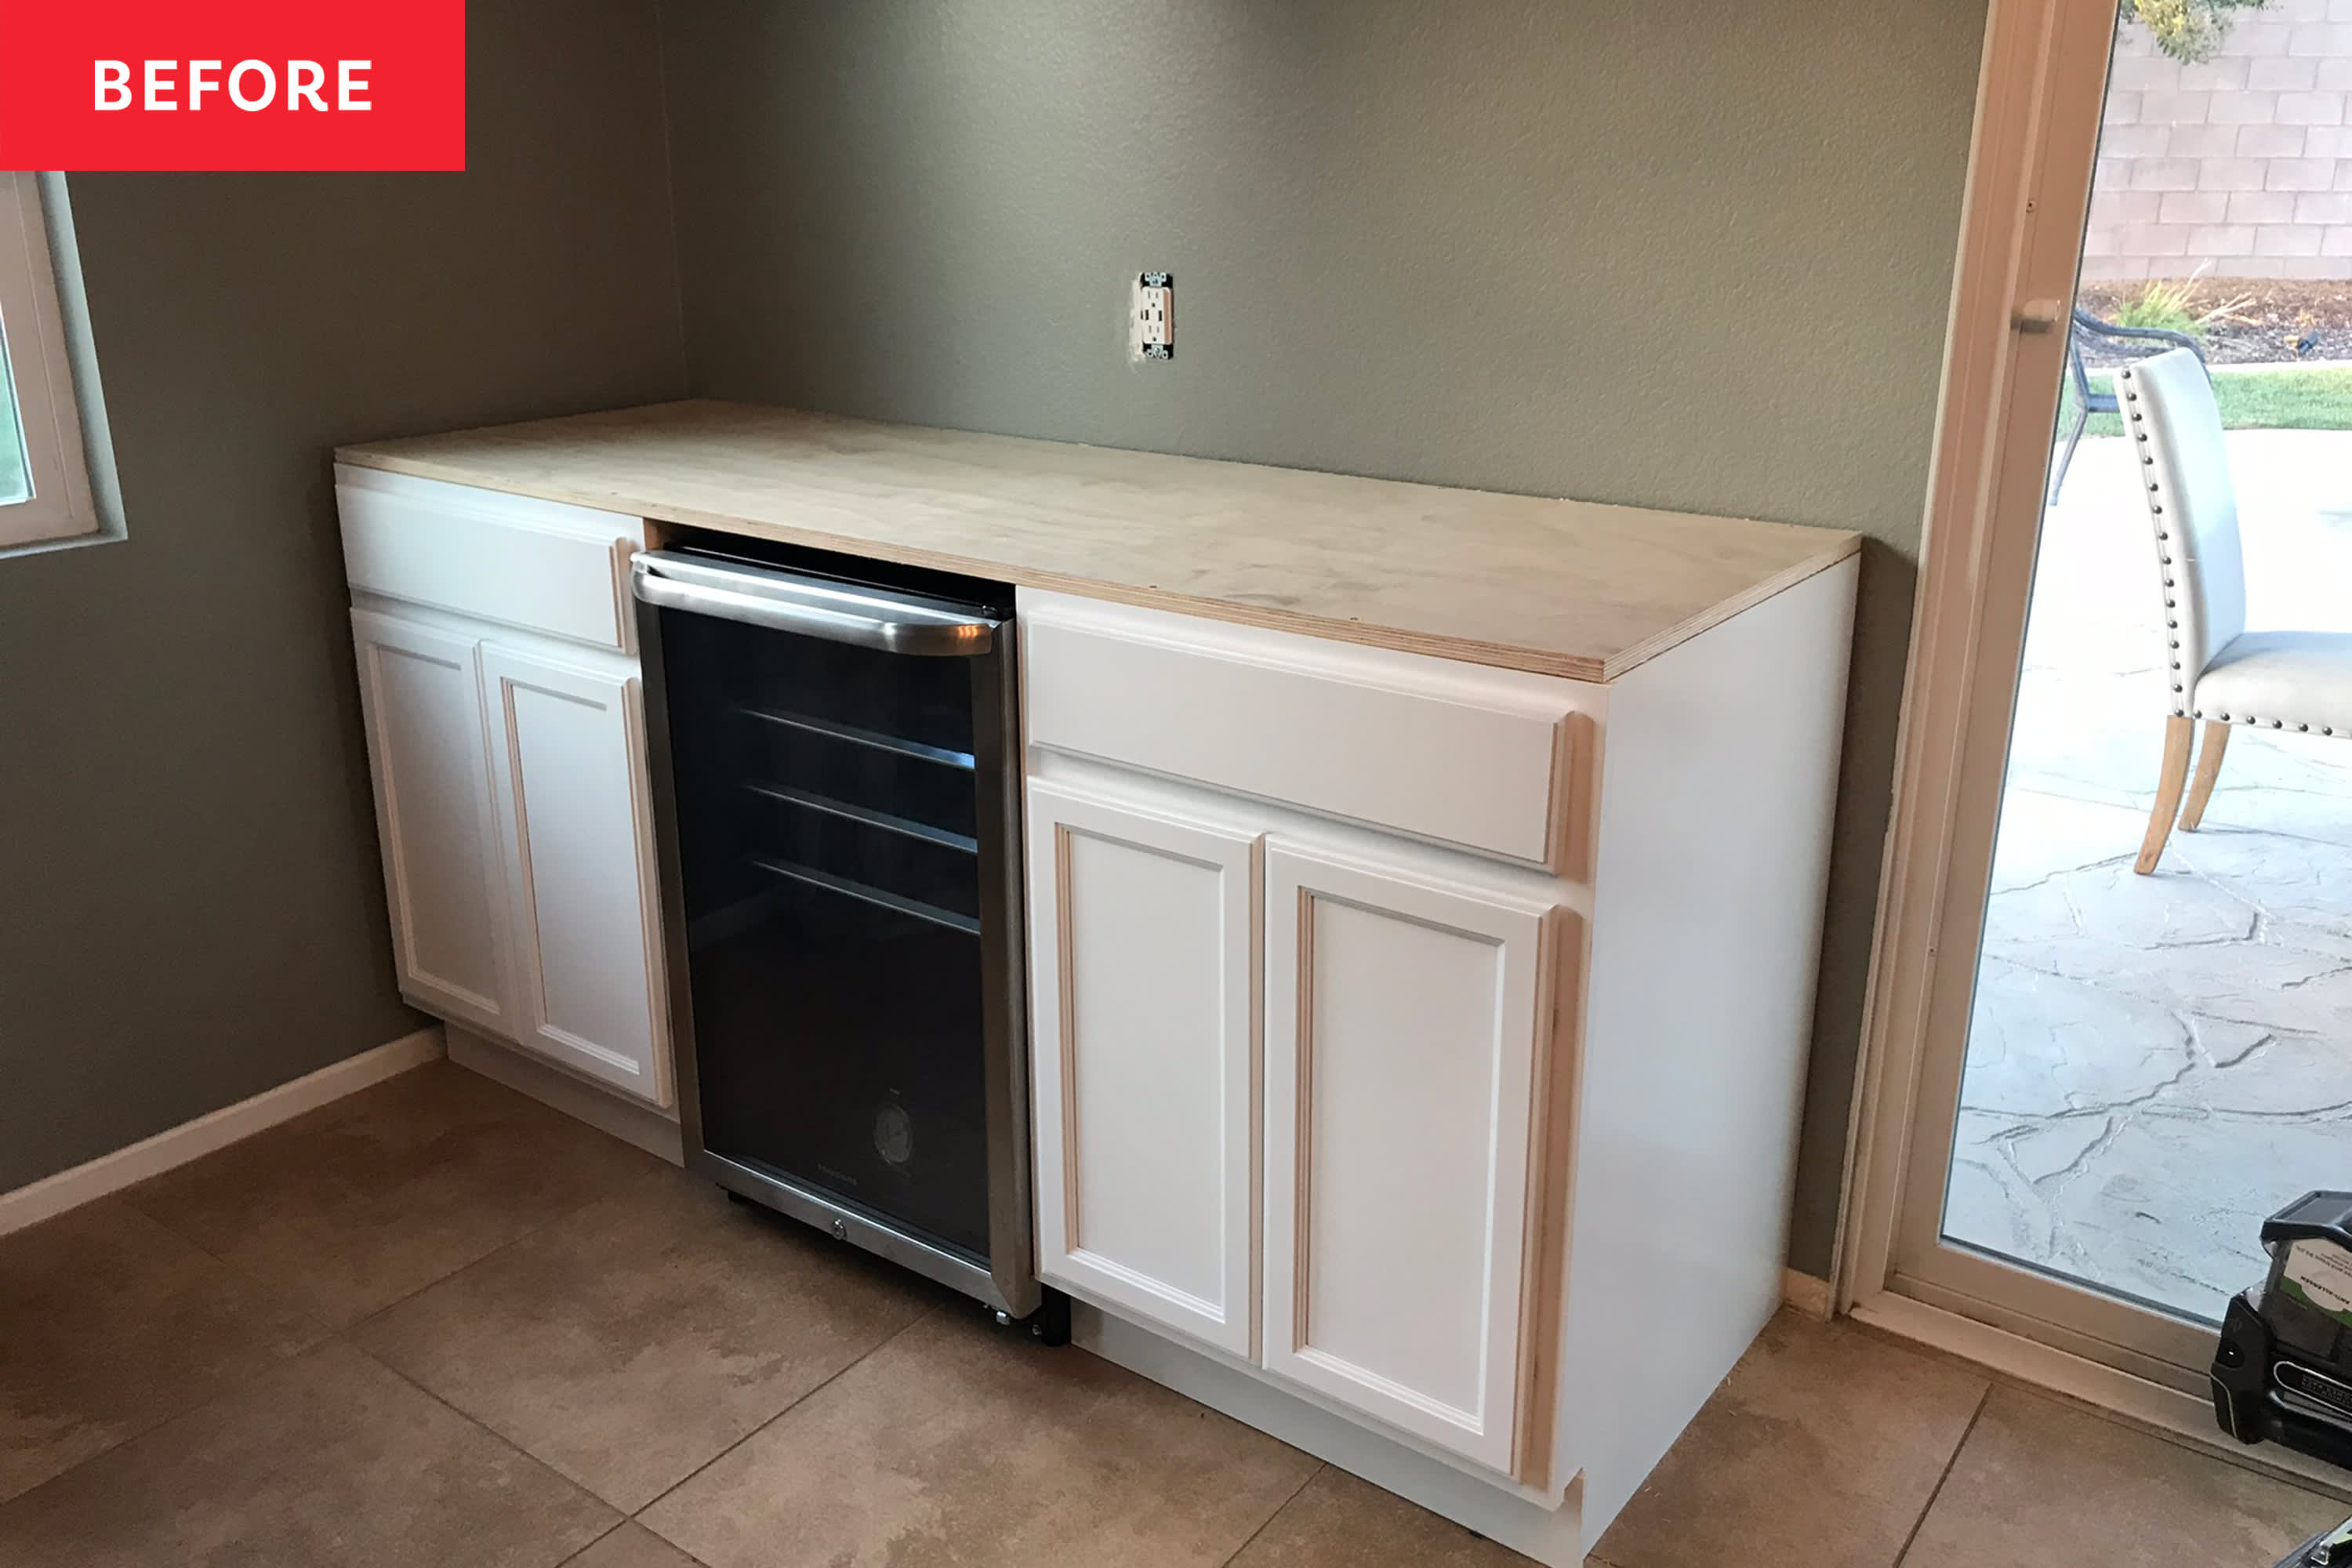 DIY Craft Station or Kitchen Island made from a kitchen cabinet